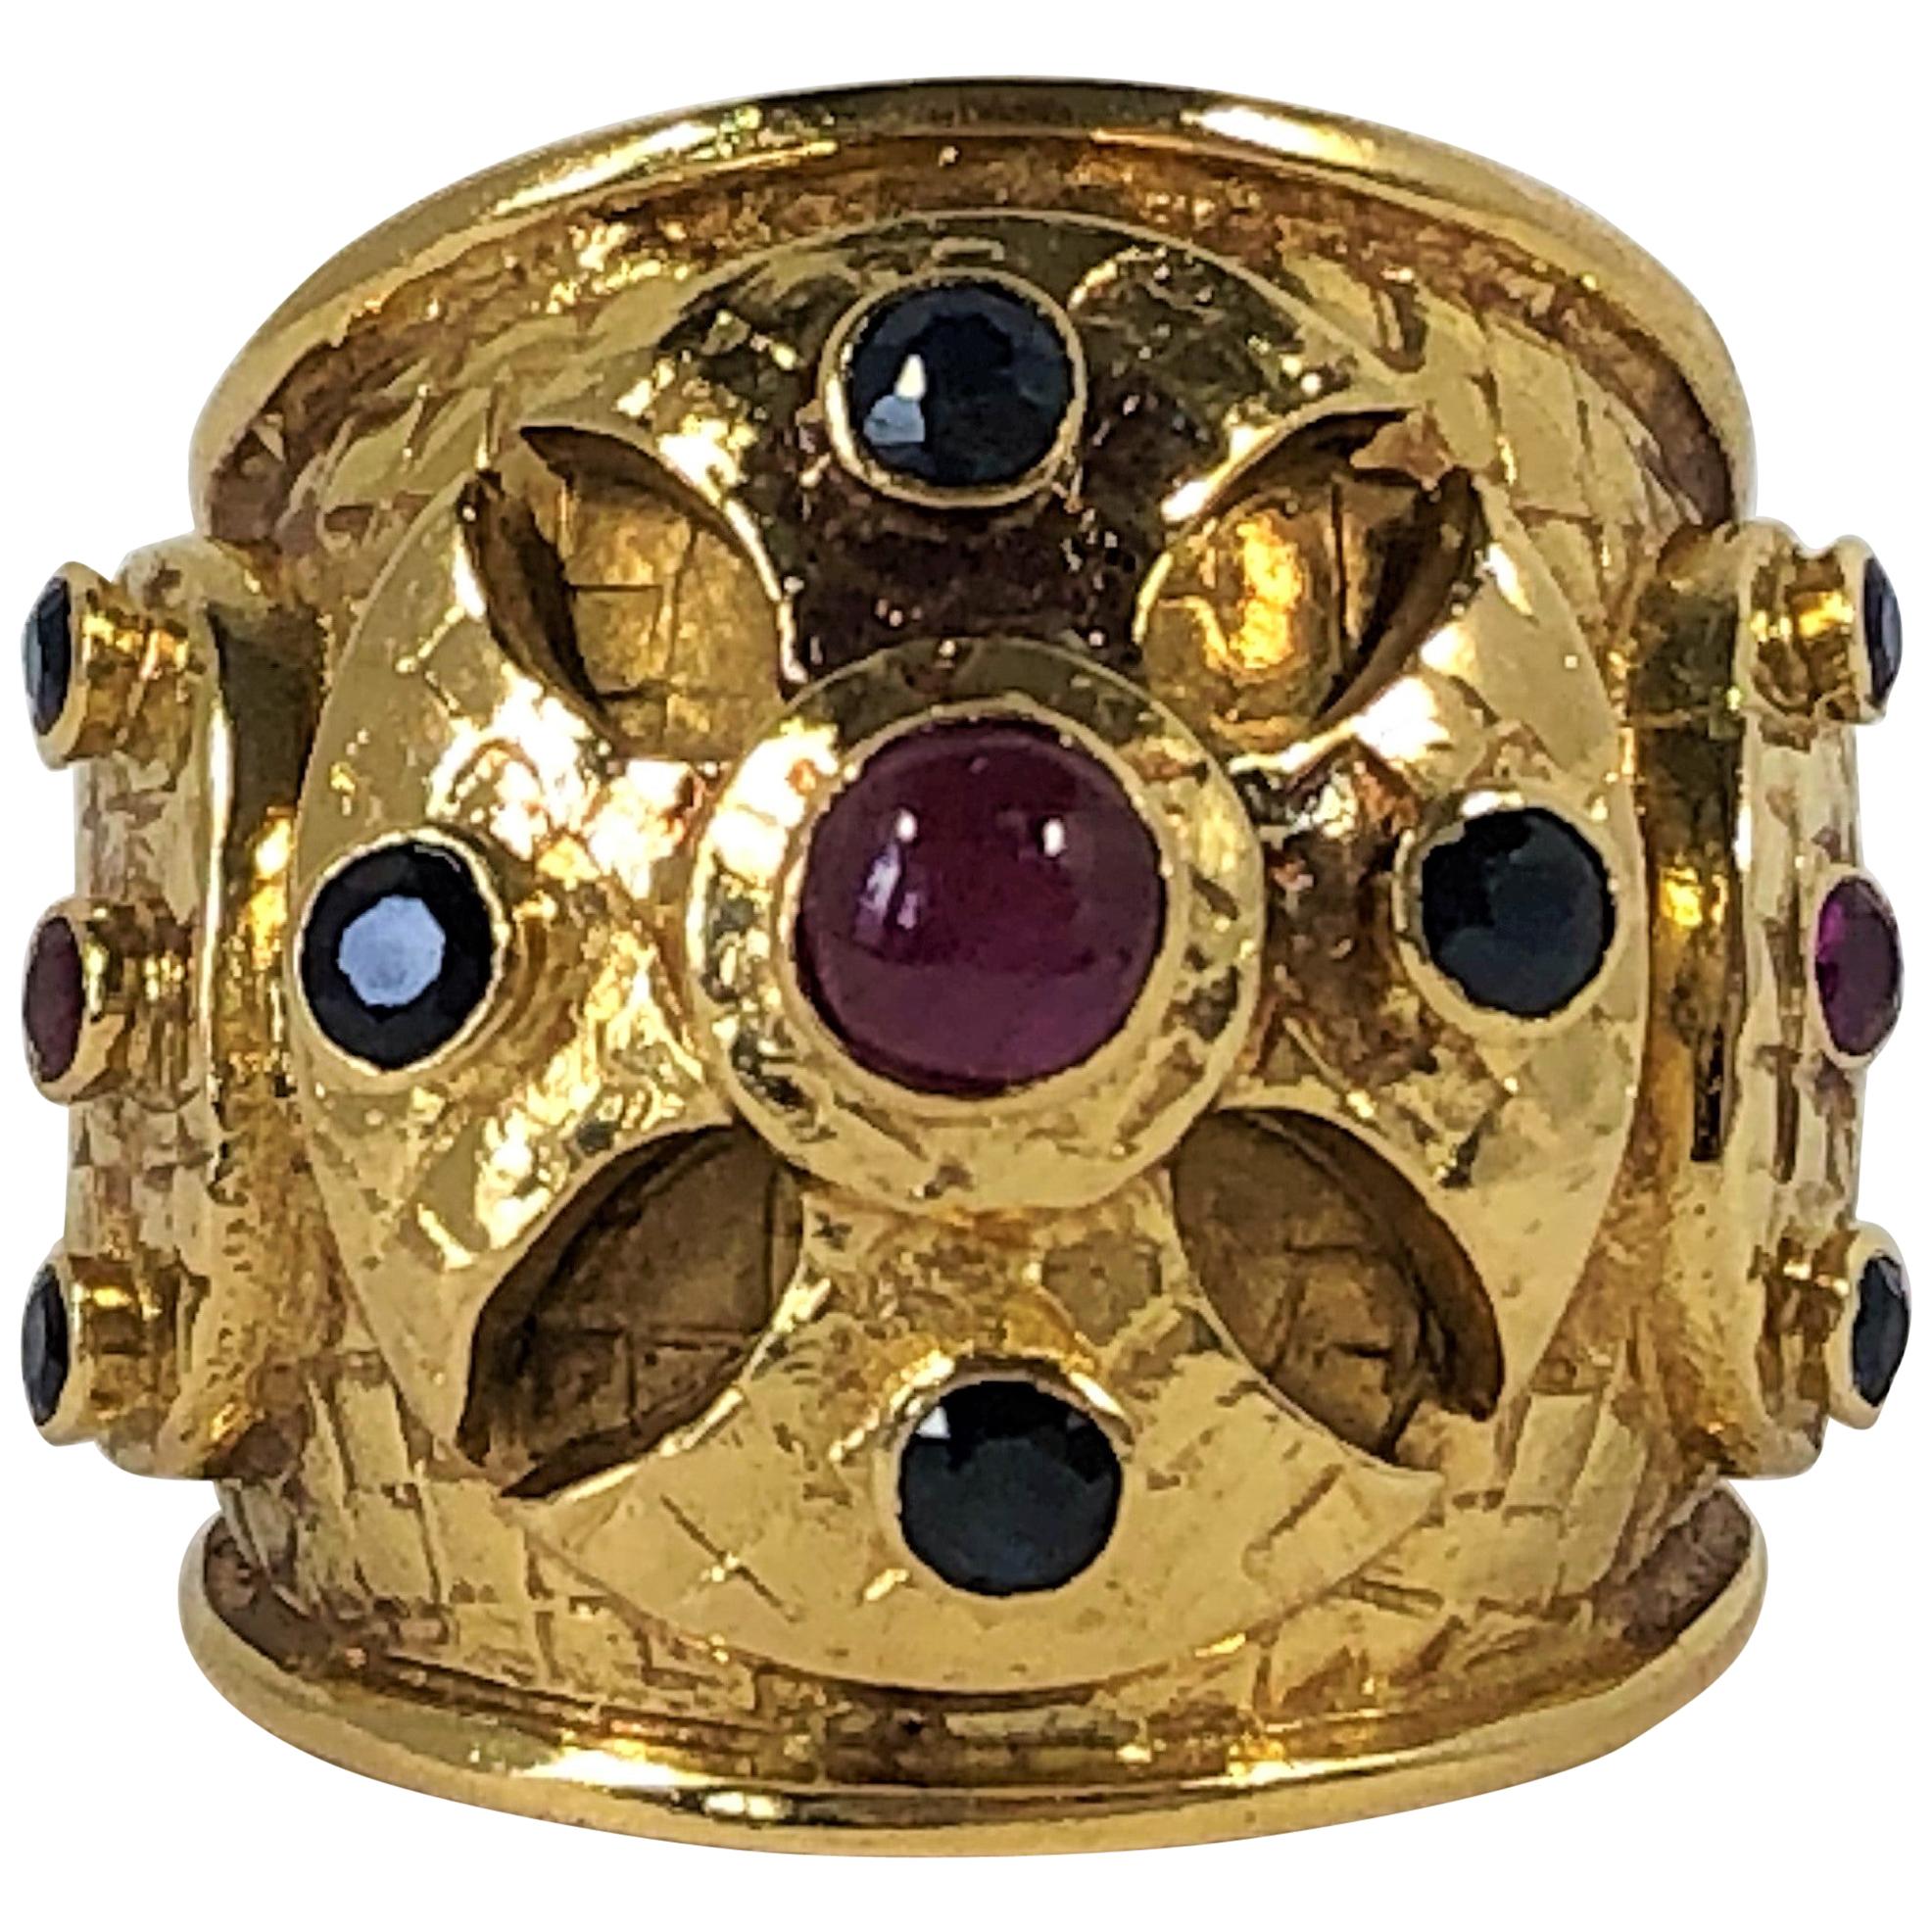 Large Scale Lalaounis Gold Band Ring with Rubies and Sapphires